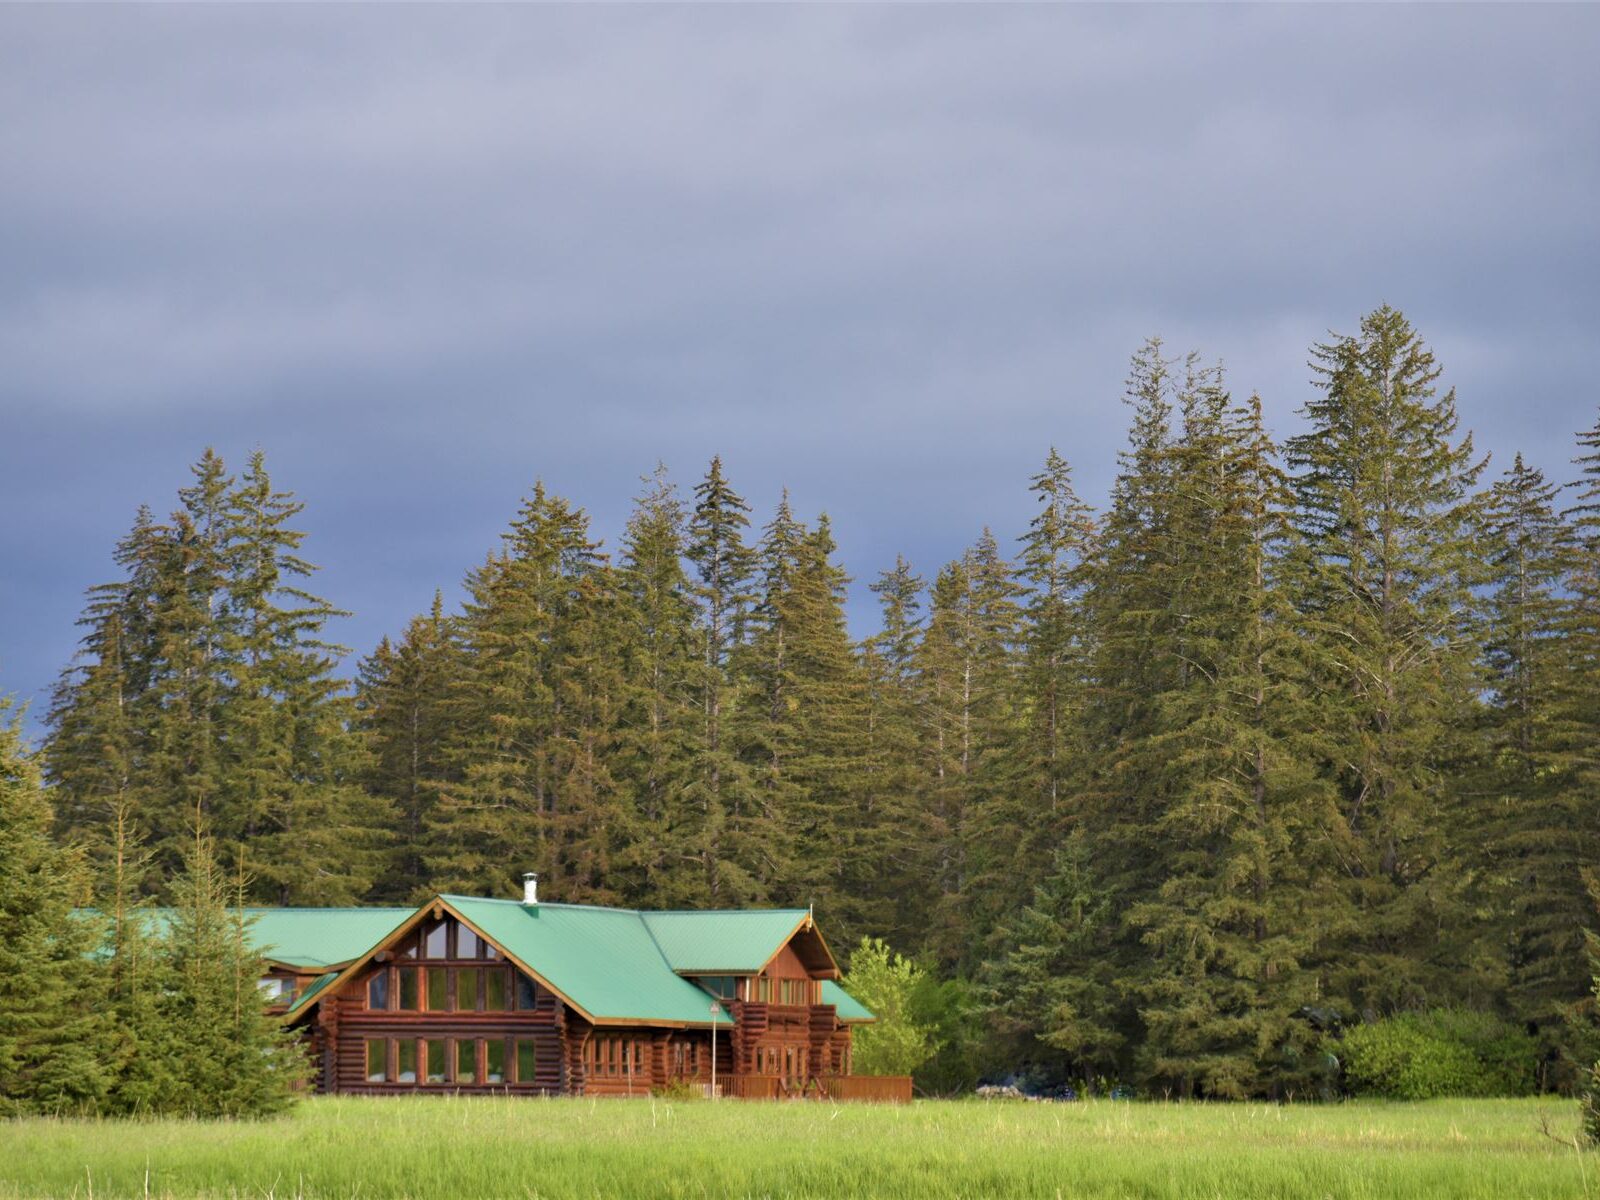 Bear Track Inn across a meadow and nestled in trees